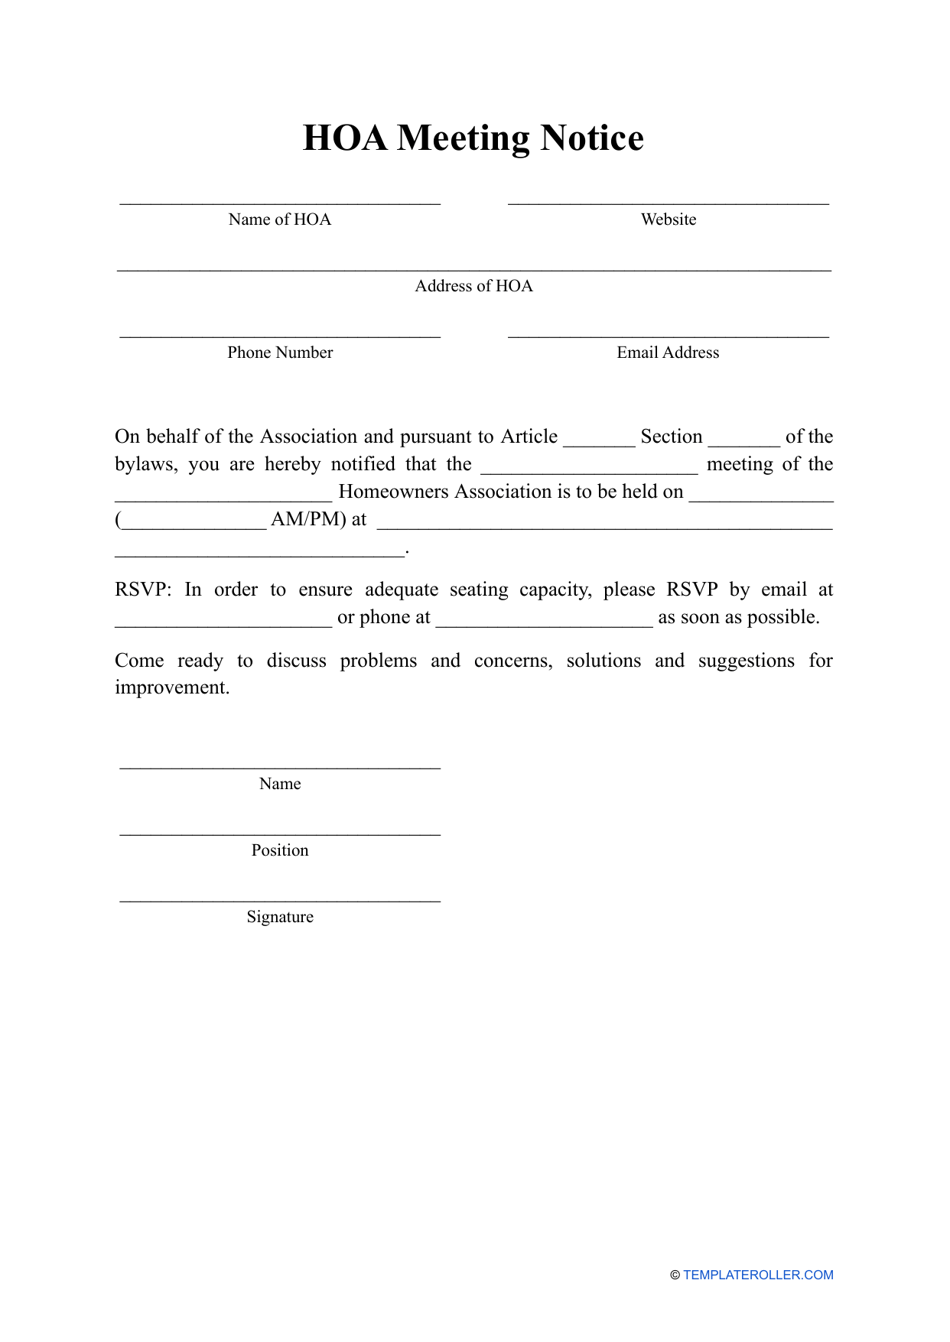 Hoa Meeting Notice Template, Page 1